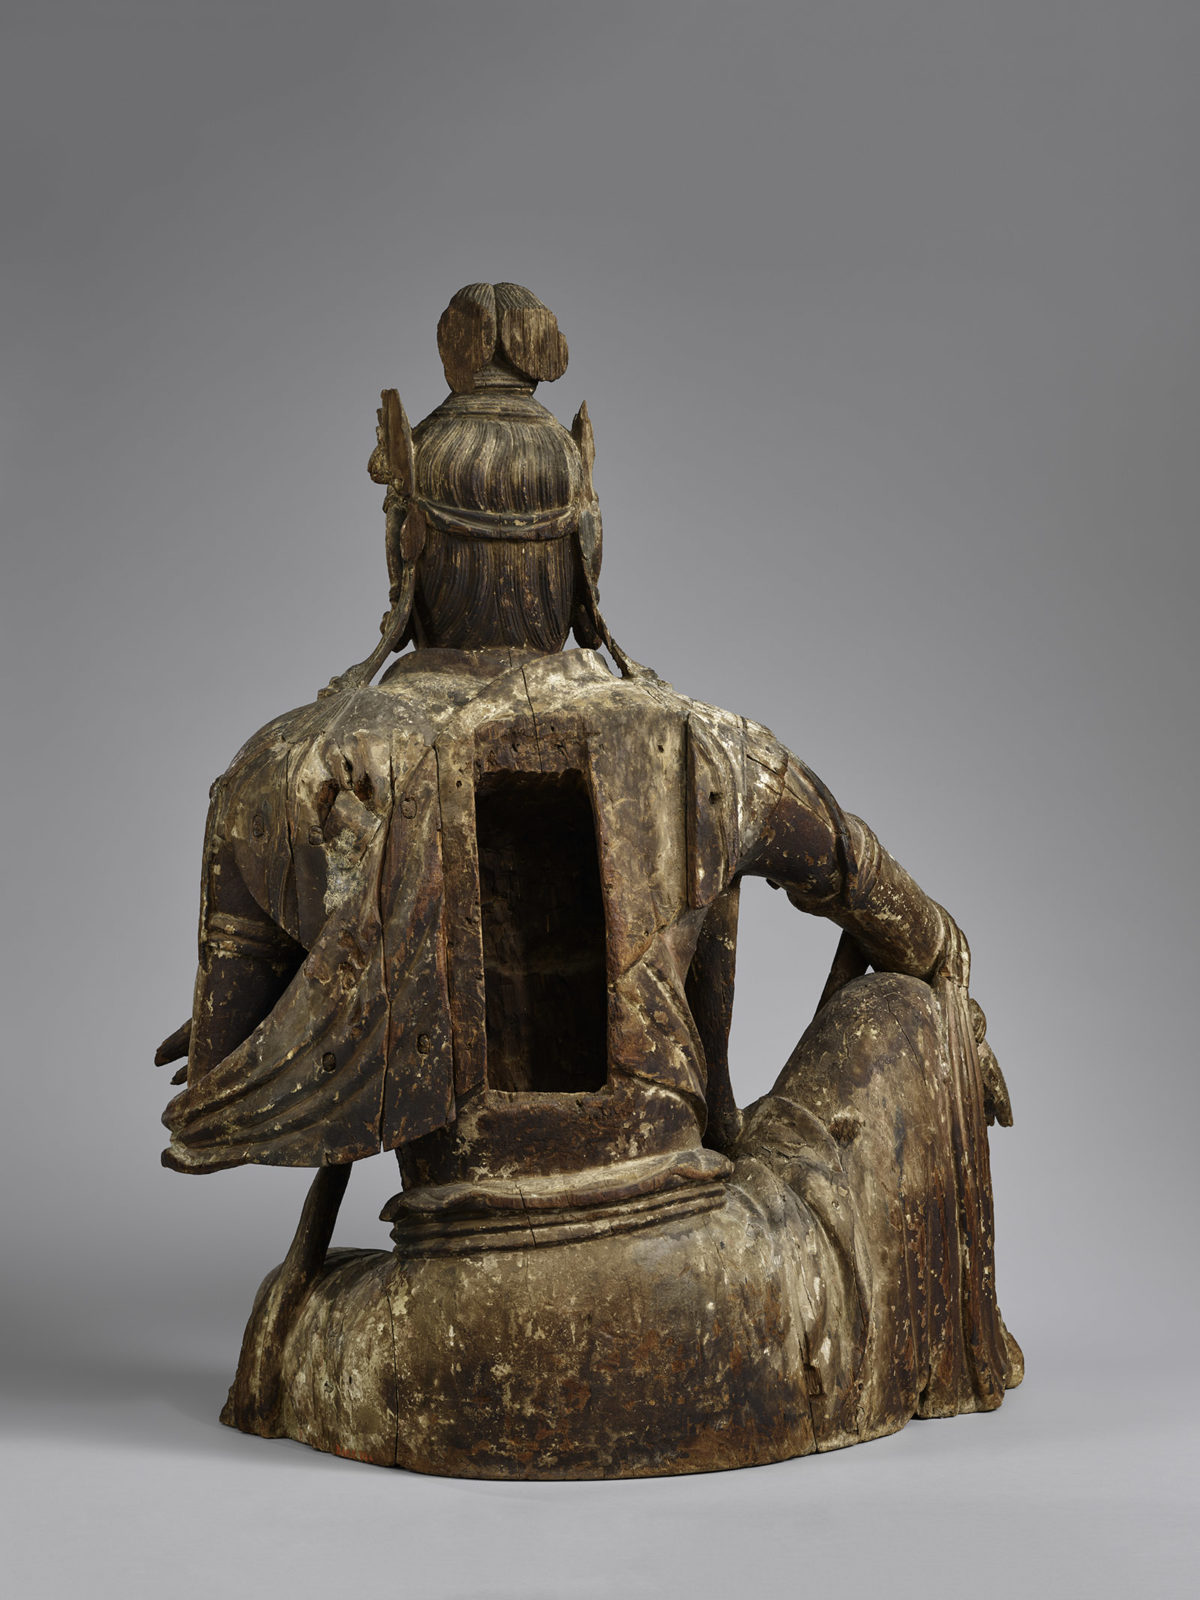 Rear view of a wooden statue of Guanyin, showing a hollow space in the back.